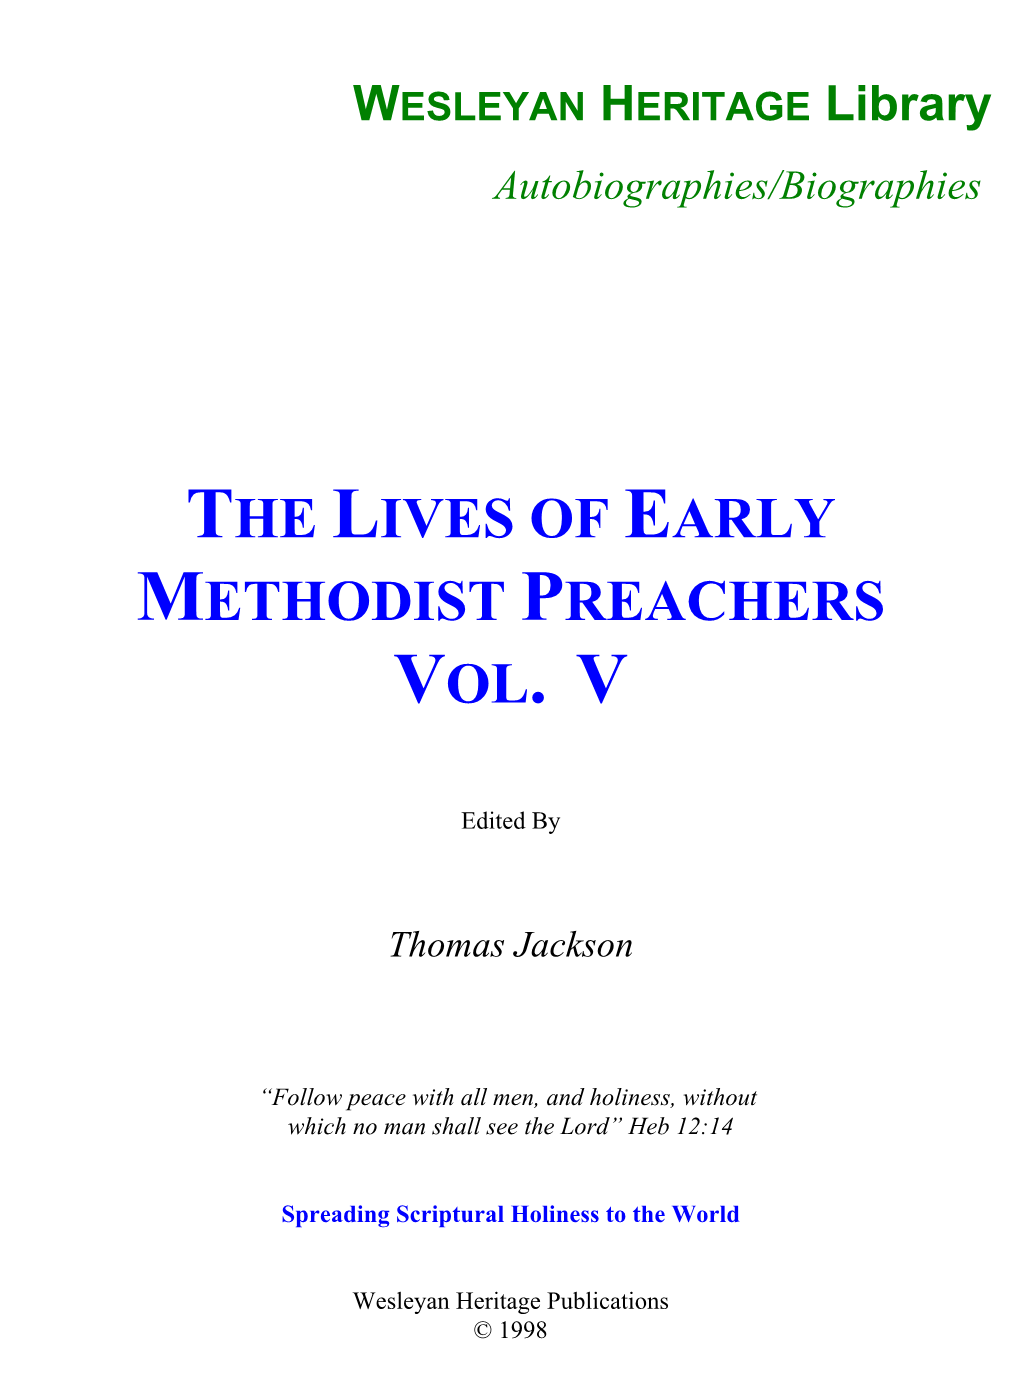 The Lives of Early Methodist Preachers, Vol. V